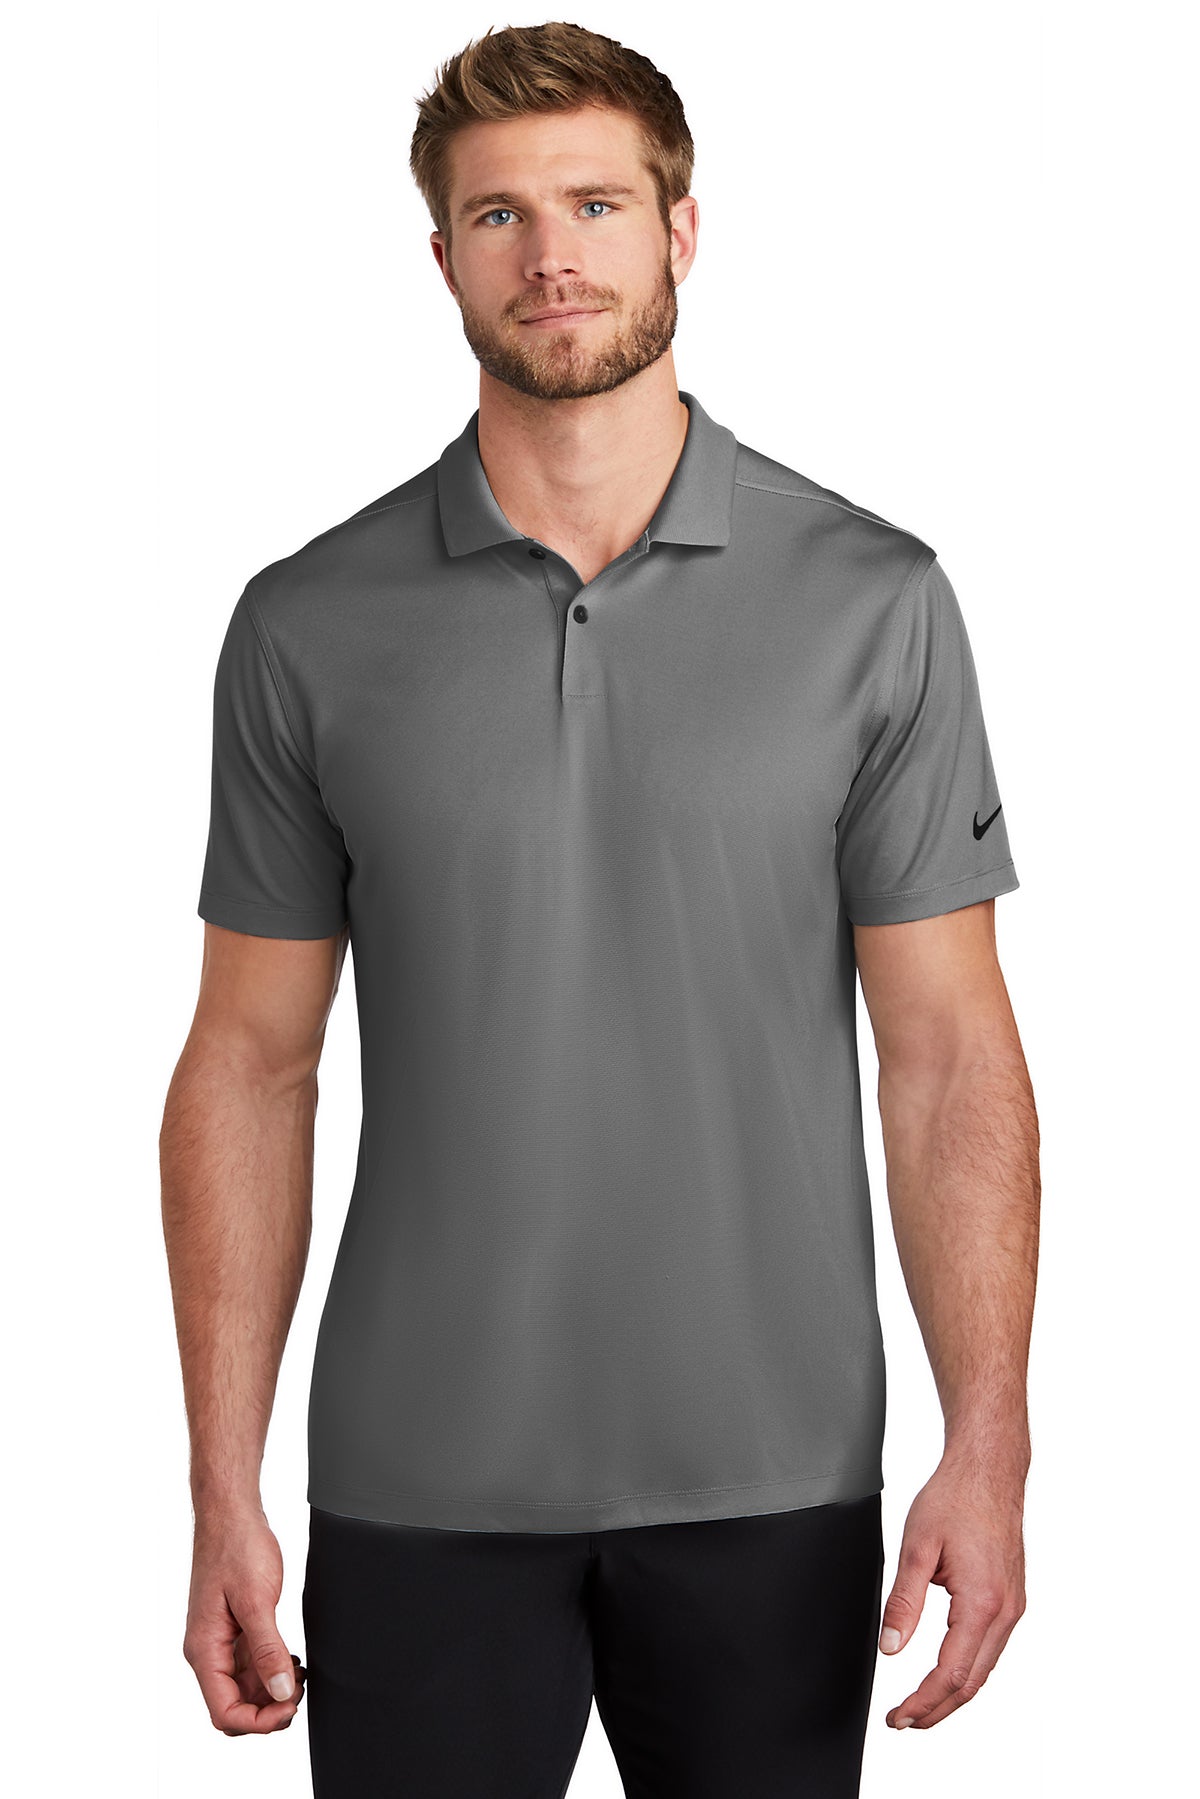 NKBV6041  Nike Dry Victory Textured Polo